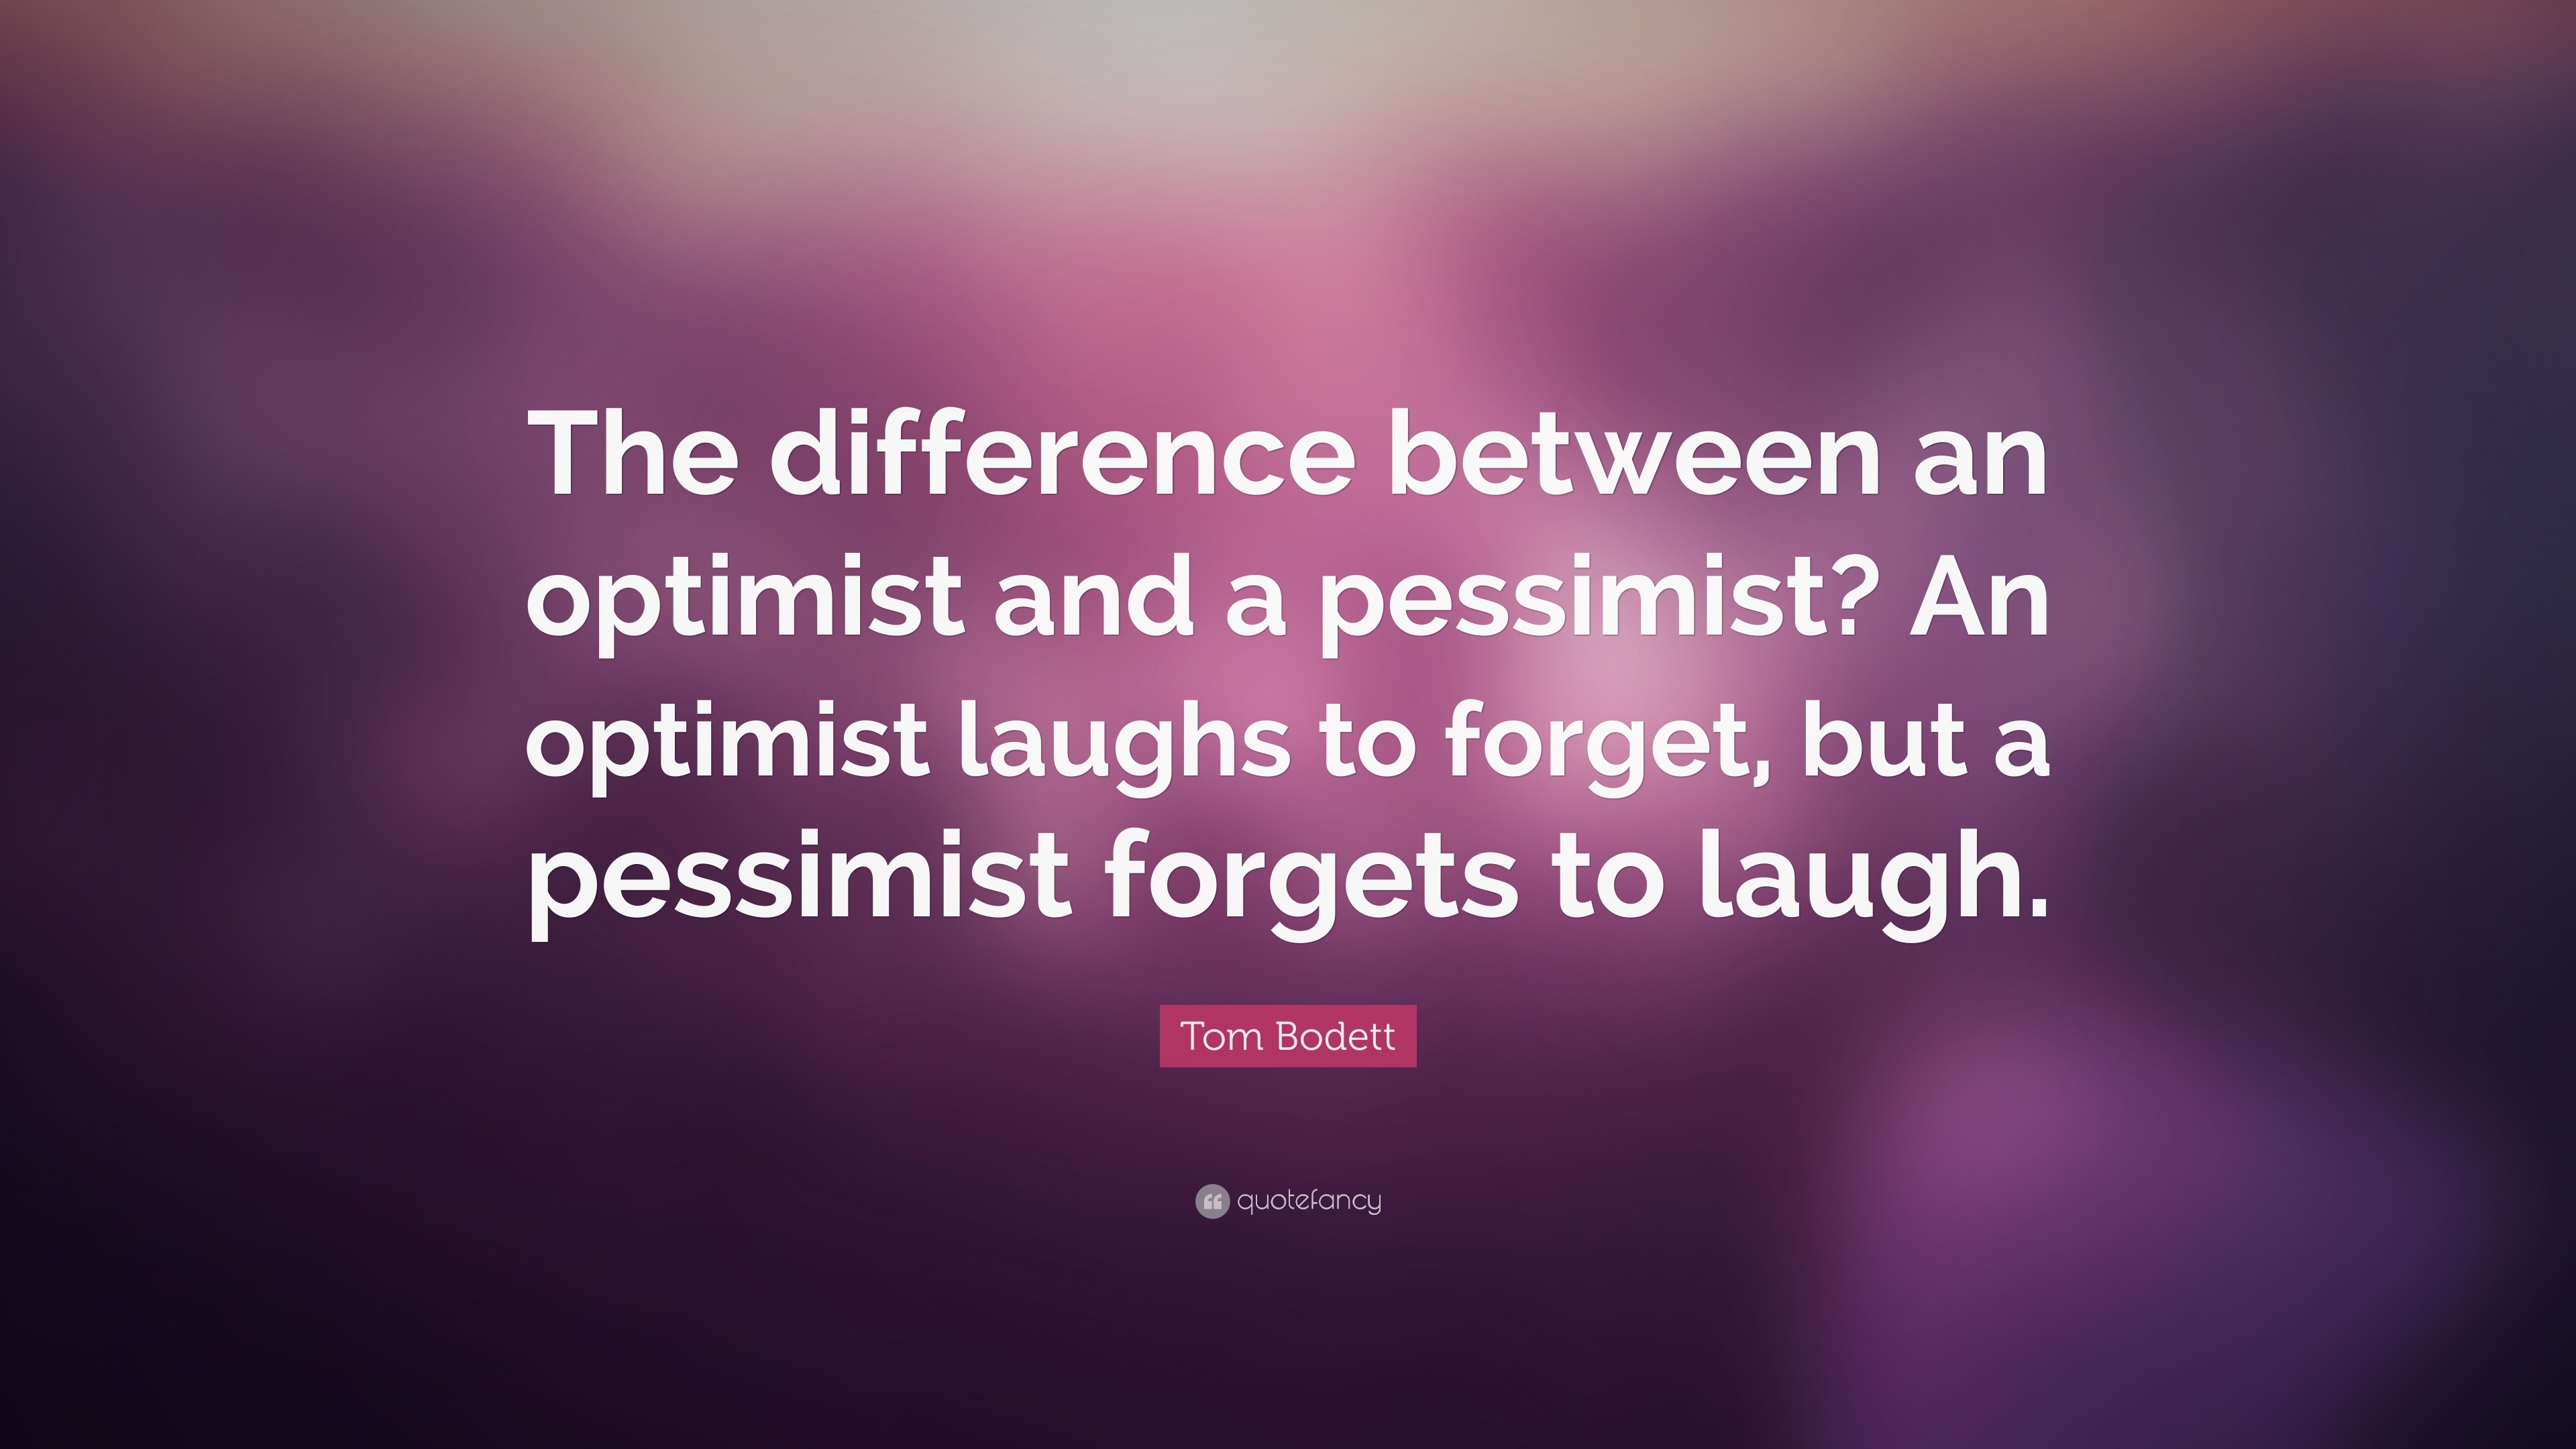 Is and pessimistic what difference between the optimistic What is